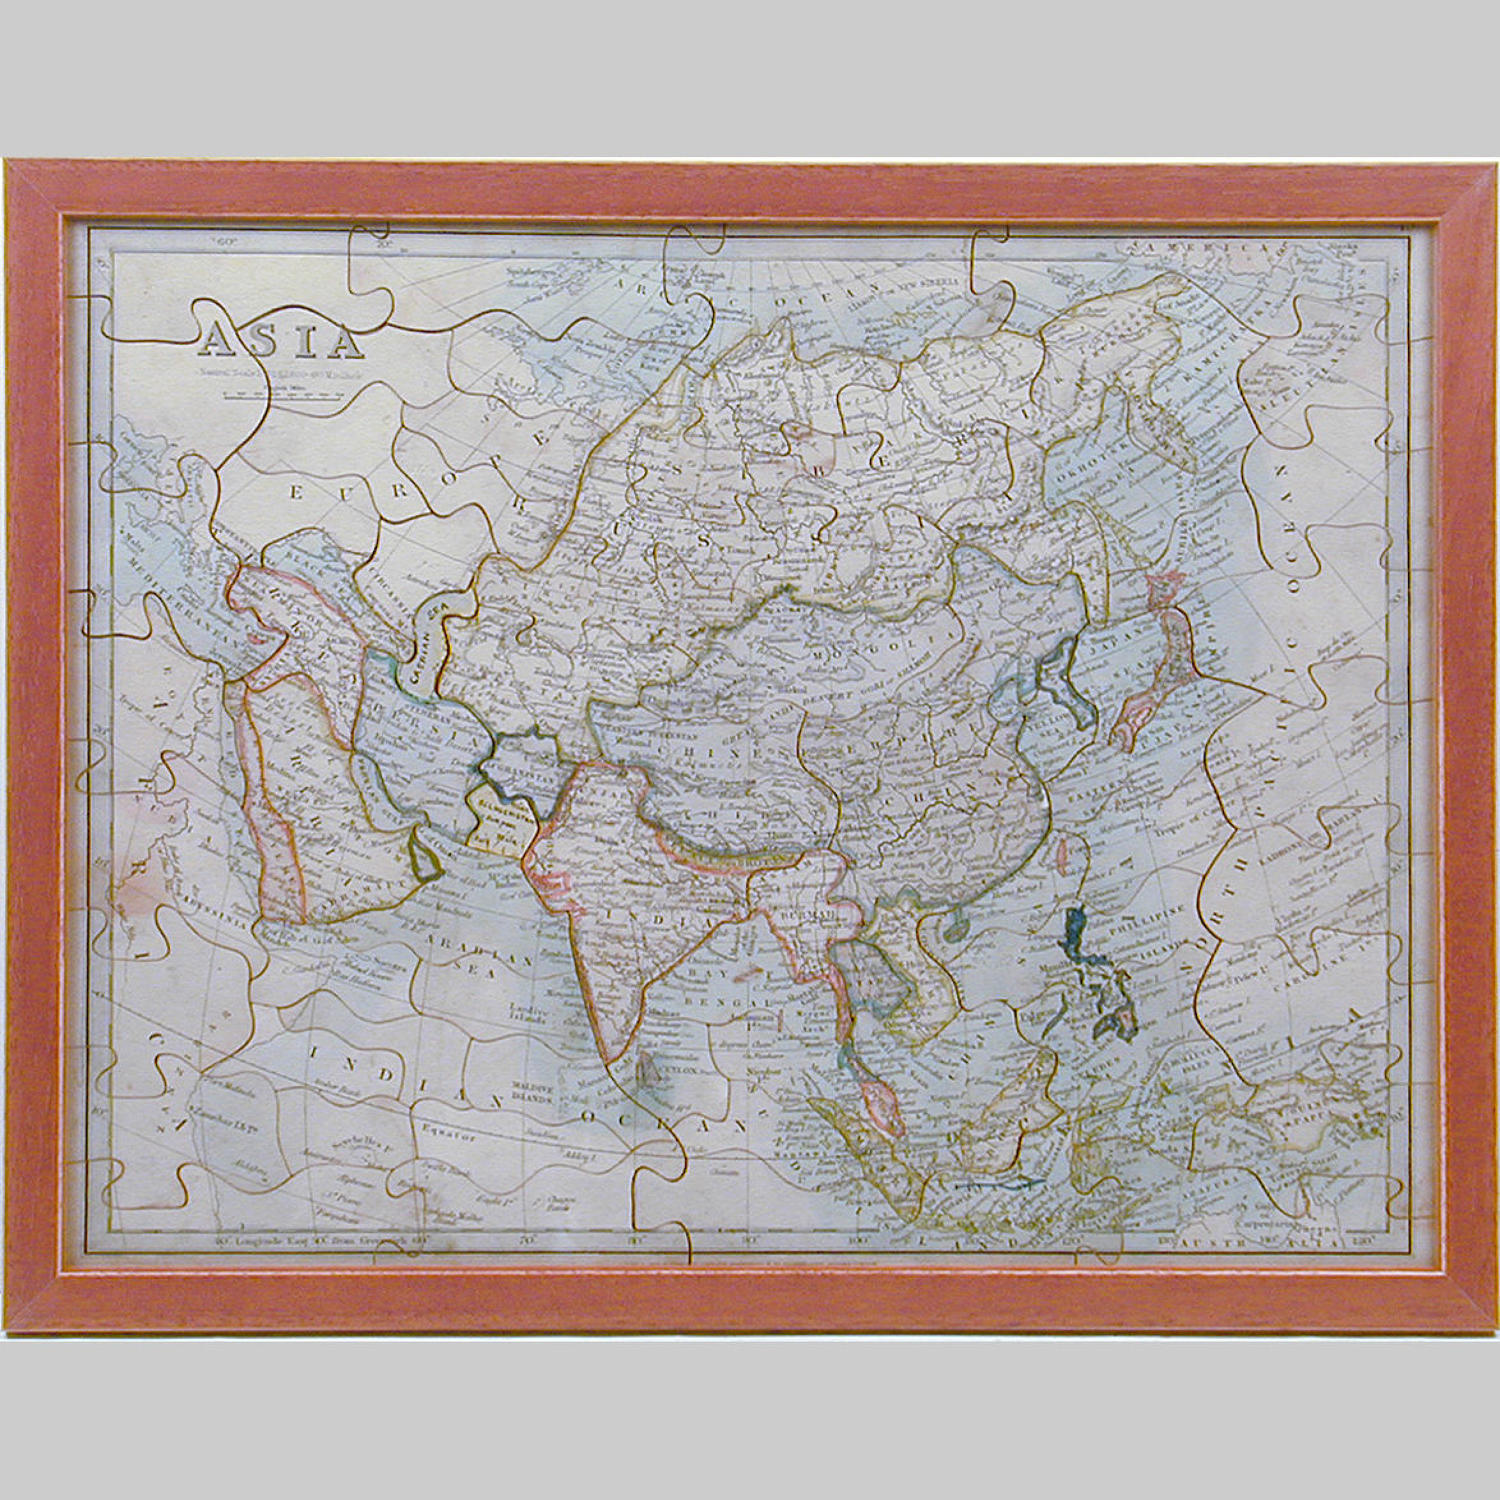 Boxed dissection jigsaw map of Asia by W.Peacock